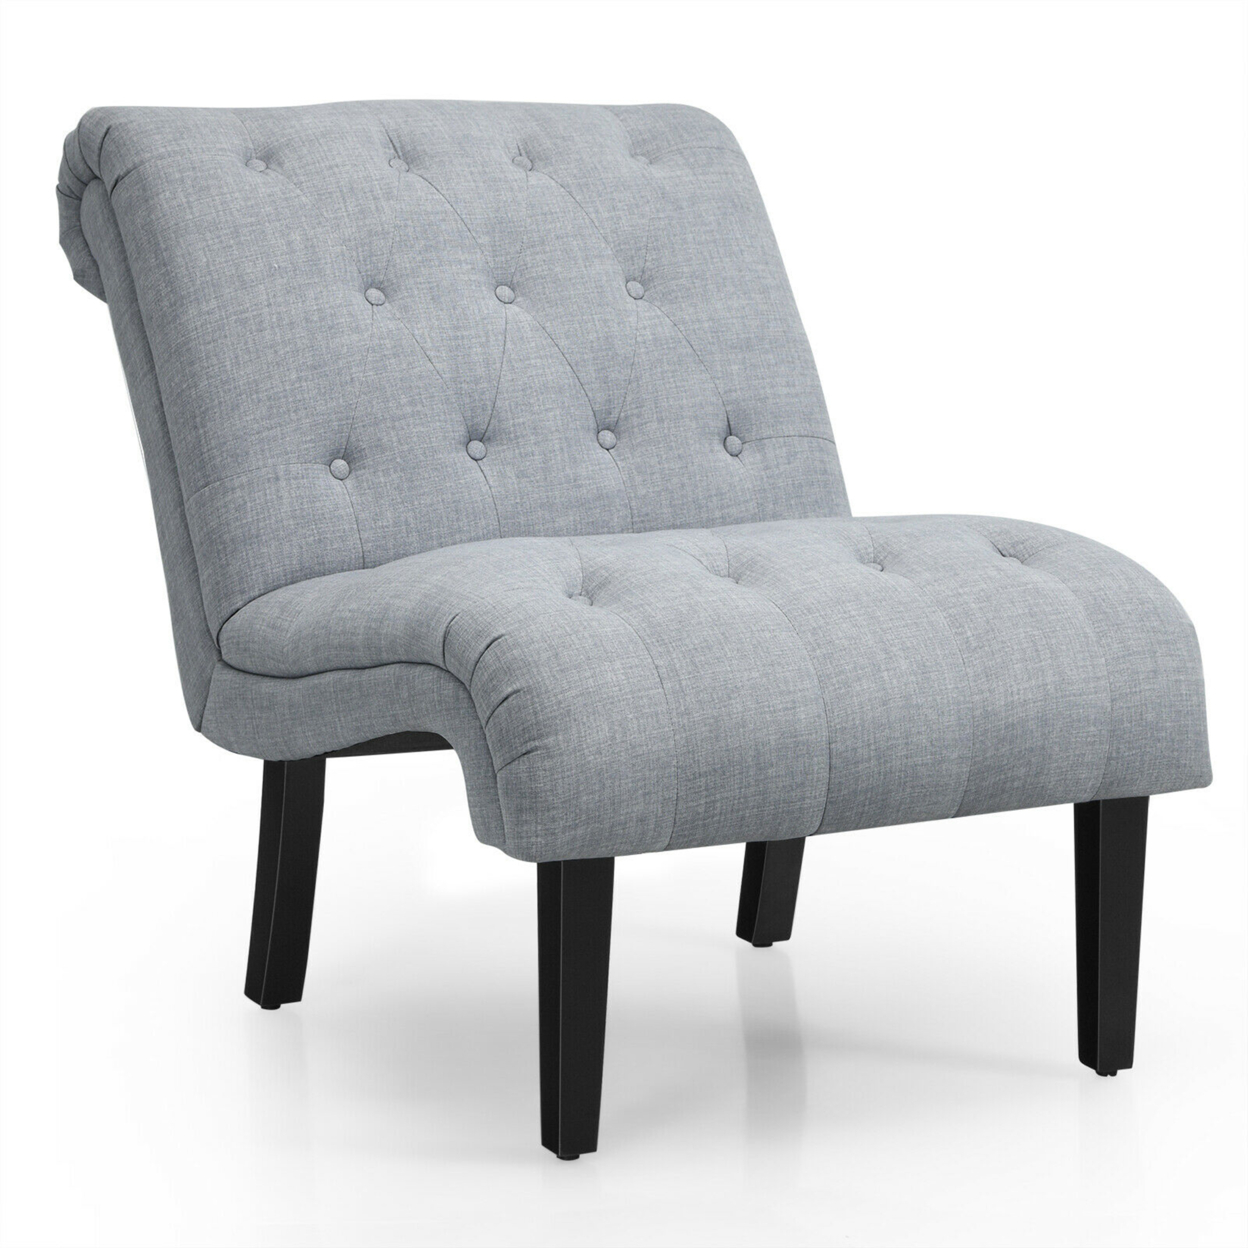 Armless Accent Chair Upholstered Tufted Lounge Chair Wood Leg - Light Grey